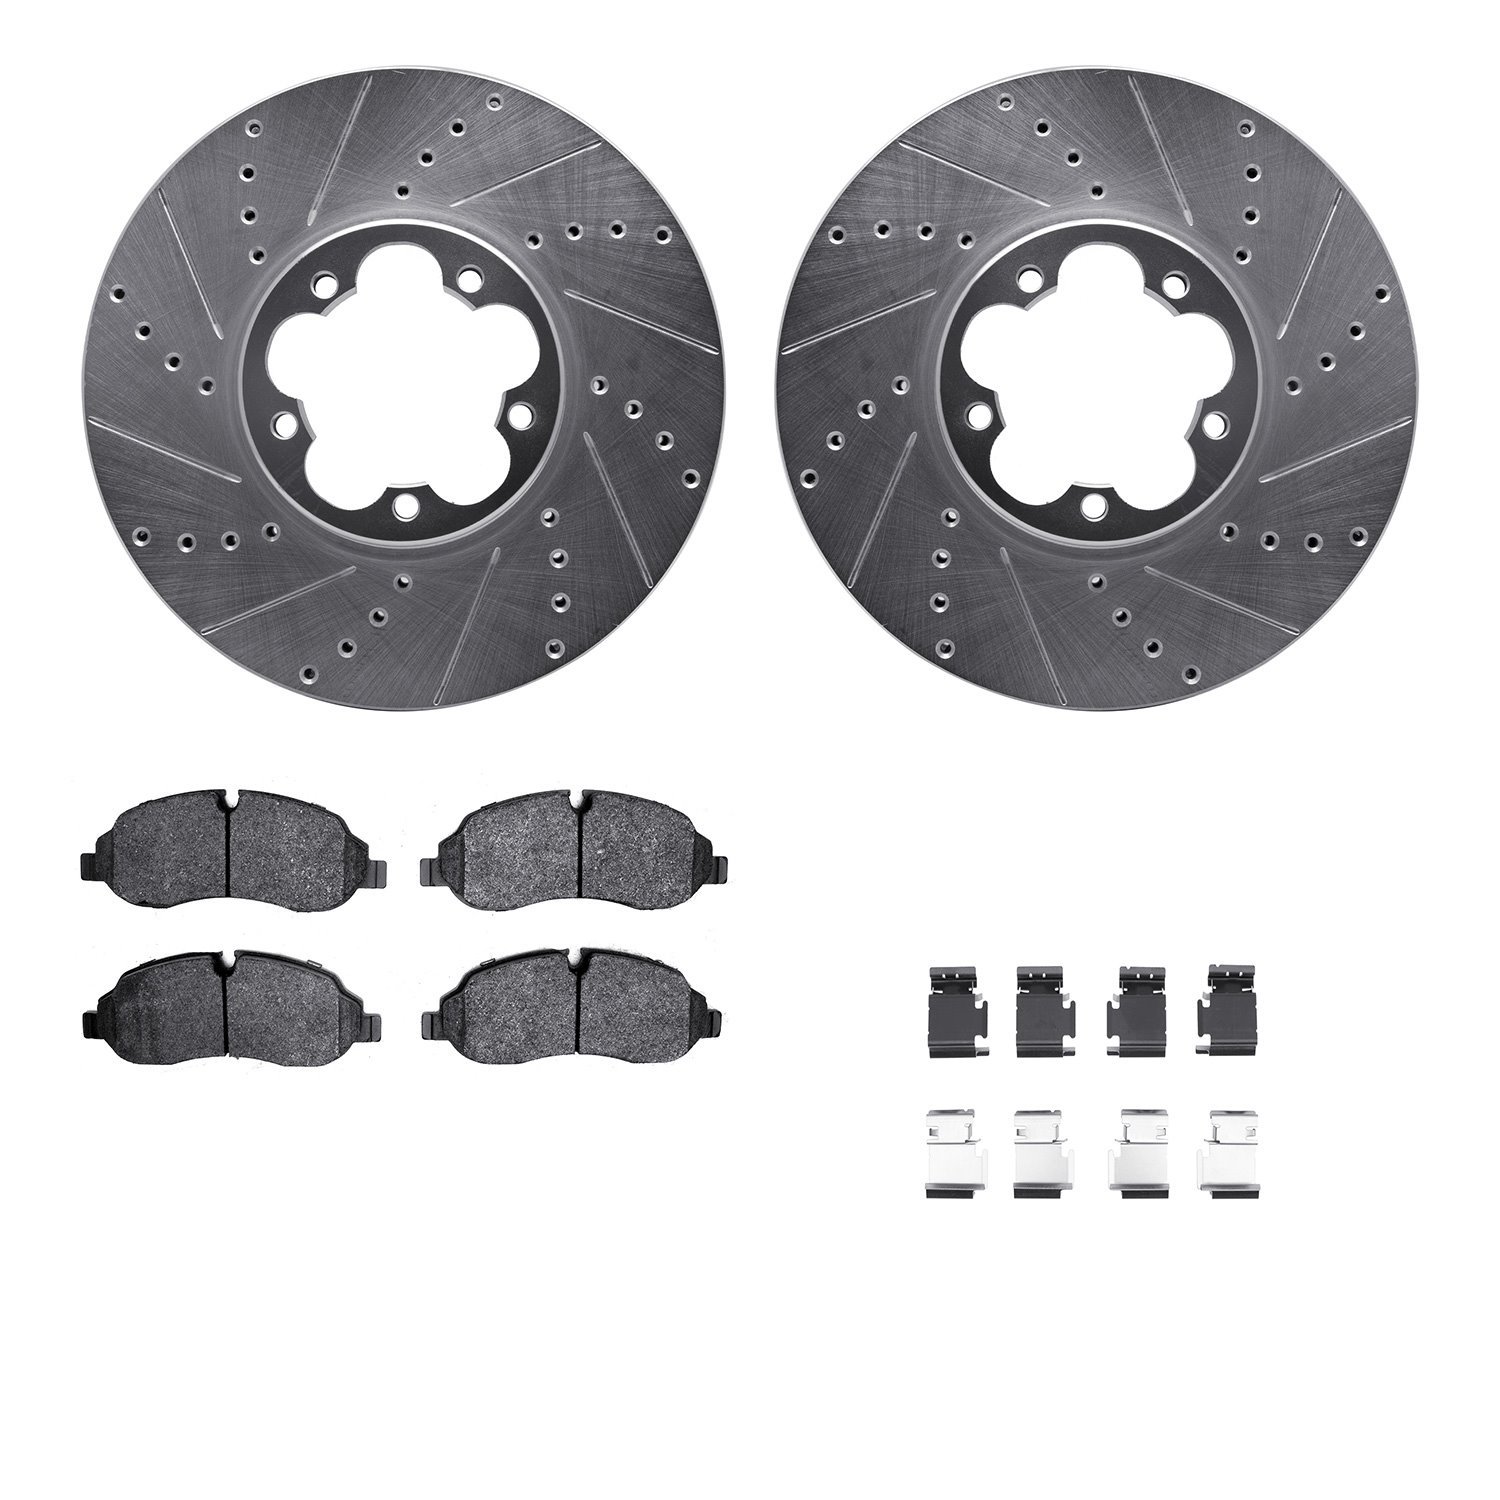 7212-99242 Drilled/Slotted Rotors w/Heavy-Duty Brake Pads Kit & Hardware [Silver], Fits Select Ford/Lincoln/Mercury/Mazda, Posit